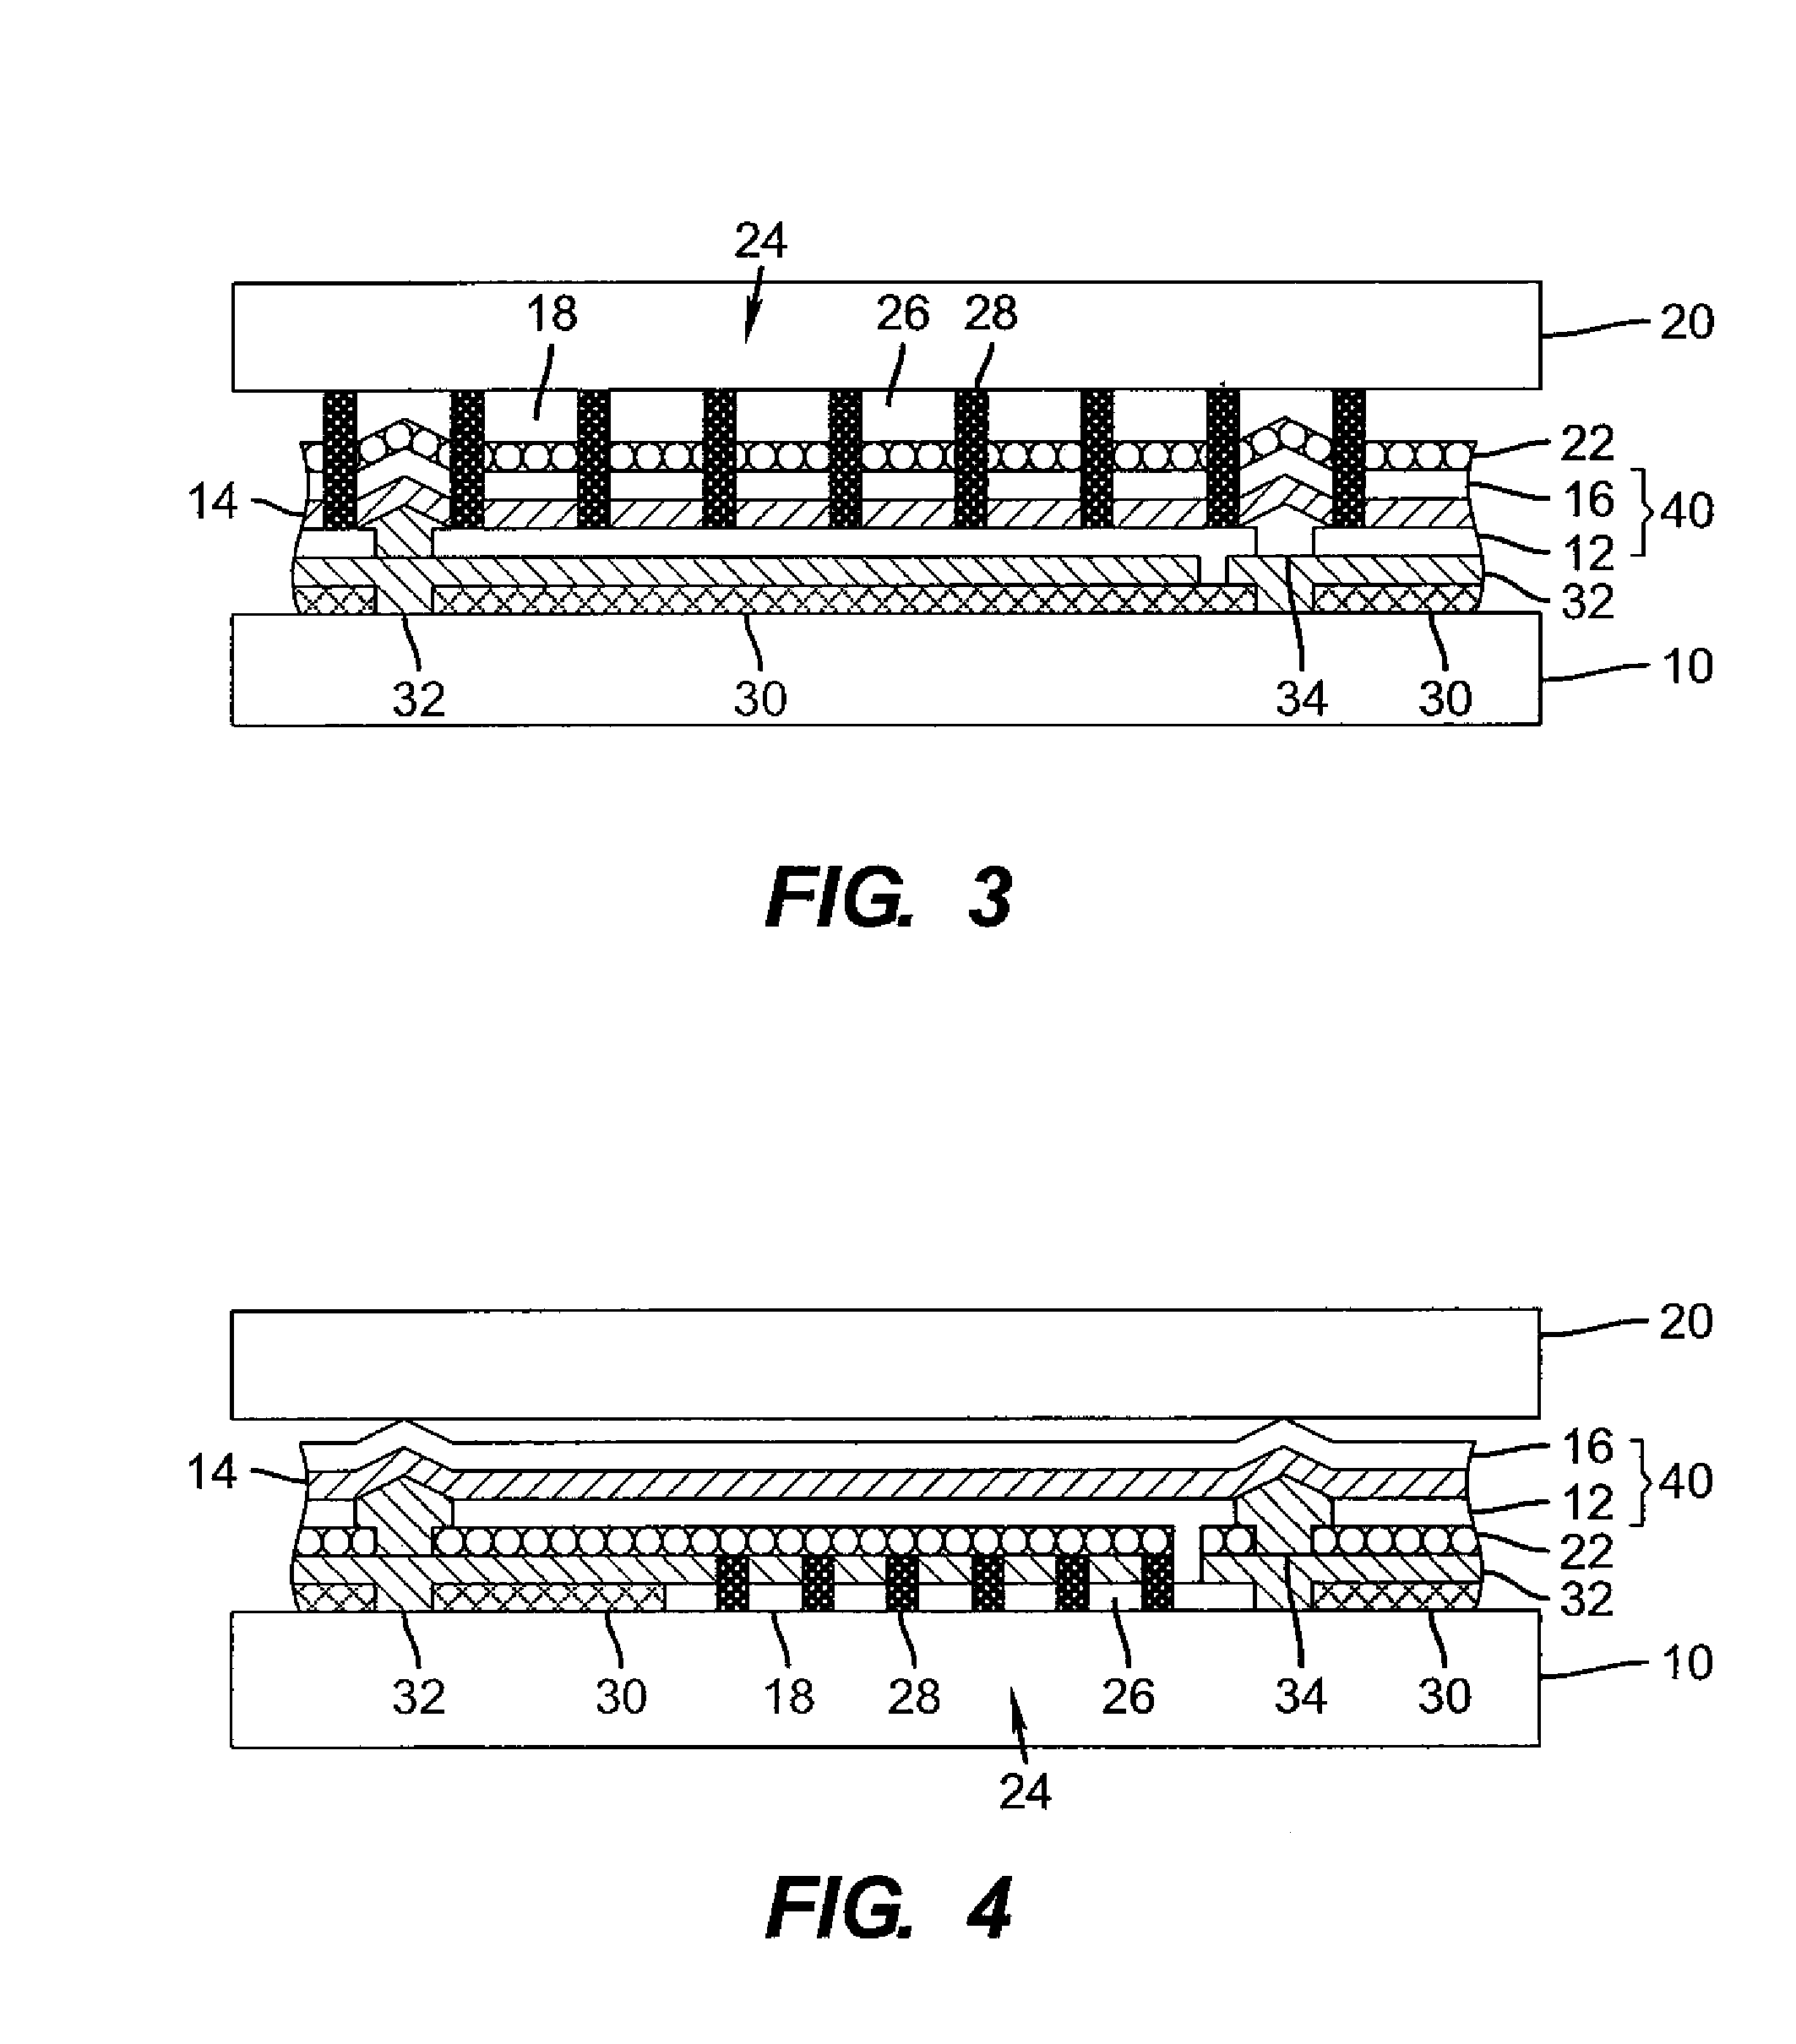 OLED device having improved output and contrast with light-scattering layer and contrast-enhancement layer